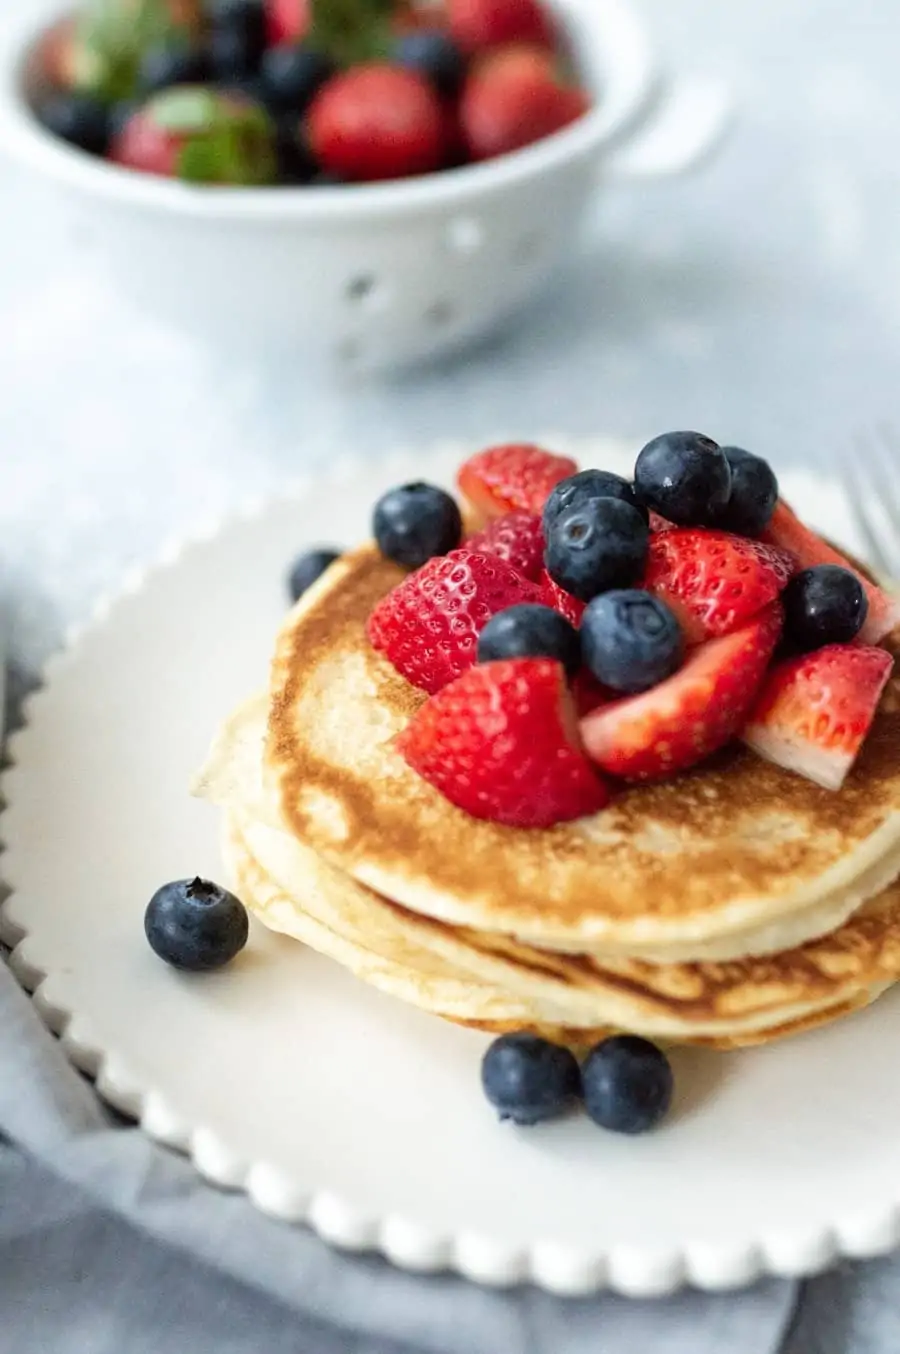 Scalloped plate with a stack of pancakes topped with strawberries and blueberries. In the background is a colander with more strawberries and blueberries